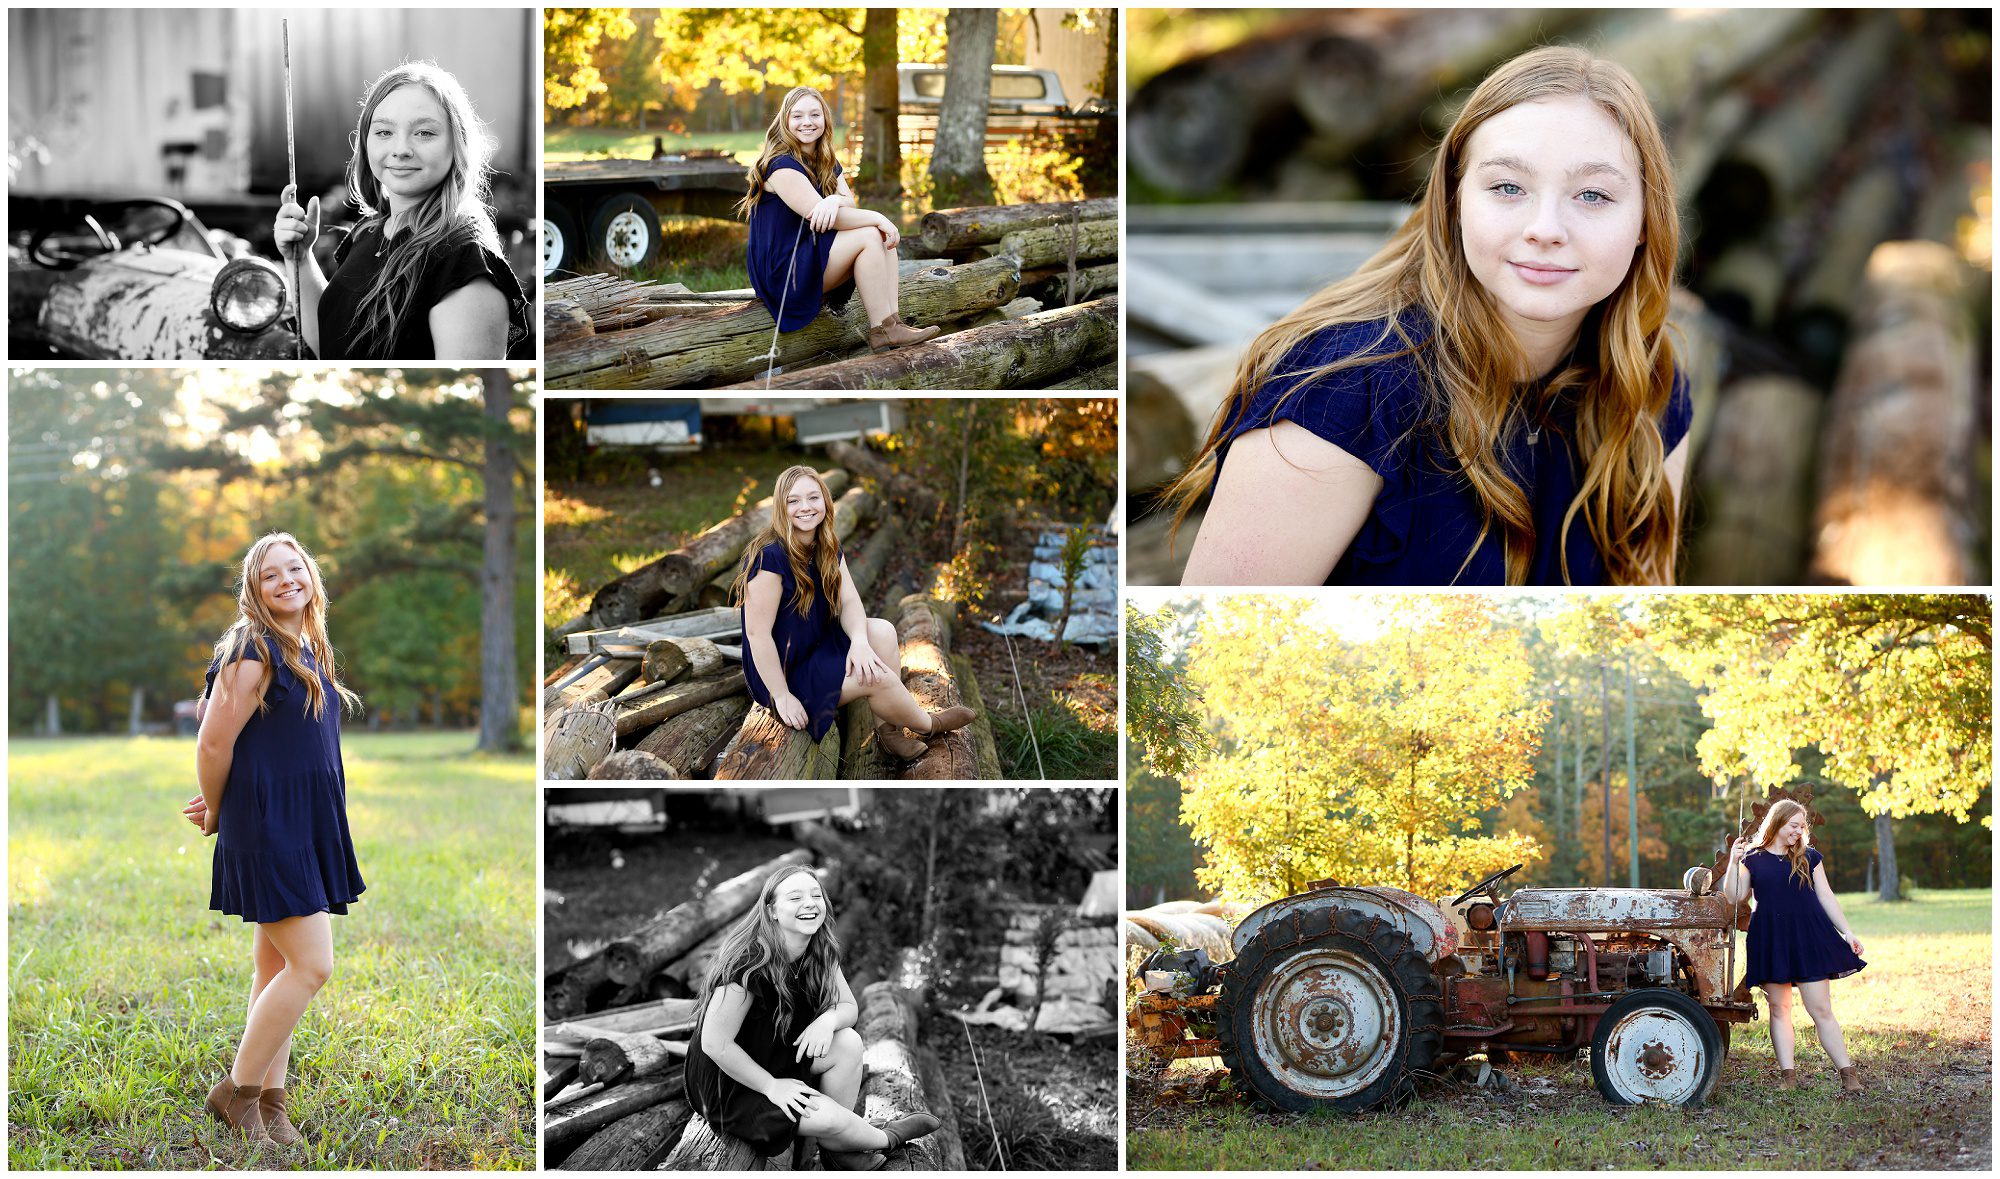 Fluvanna County High School Senior Portrait at Horse Barn Equine horses pictures fchs photographer charlottesville cville photography session class of 2022